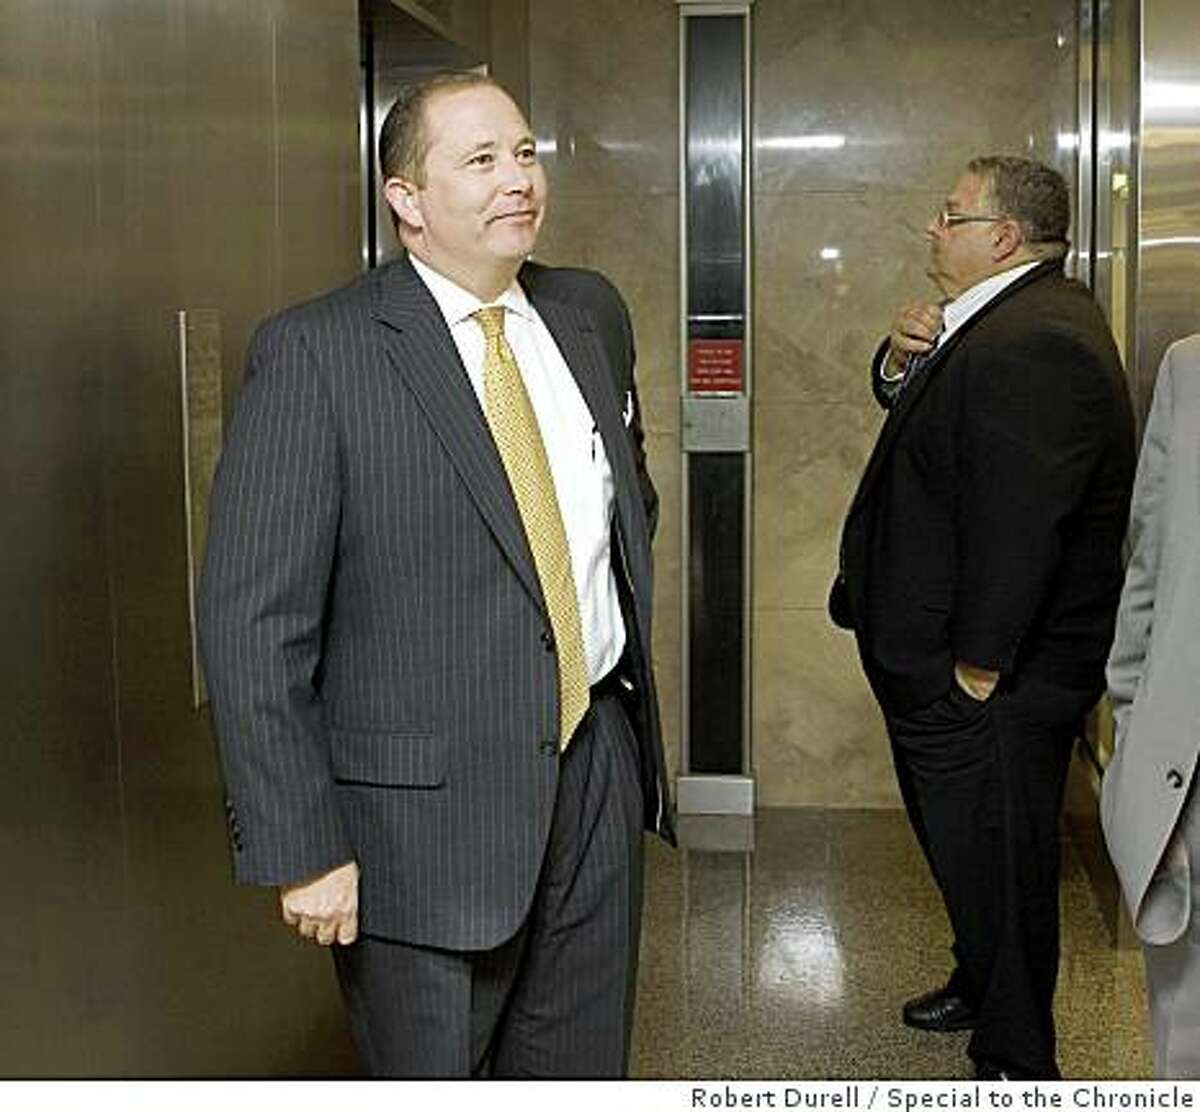 Assembly minority leader Mike Villines (R-Clovis) leaves his office near the Assembly chamber in Sacramento, California, on Monday, September 15, 2008 more than an hour before the expected vote on the state budget. The state budget is more than two months overdue.